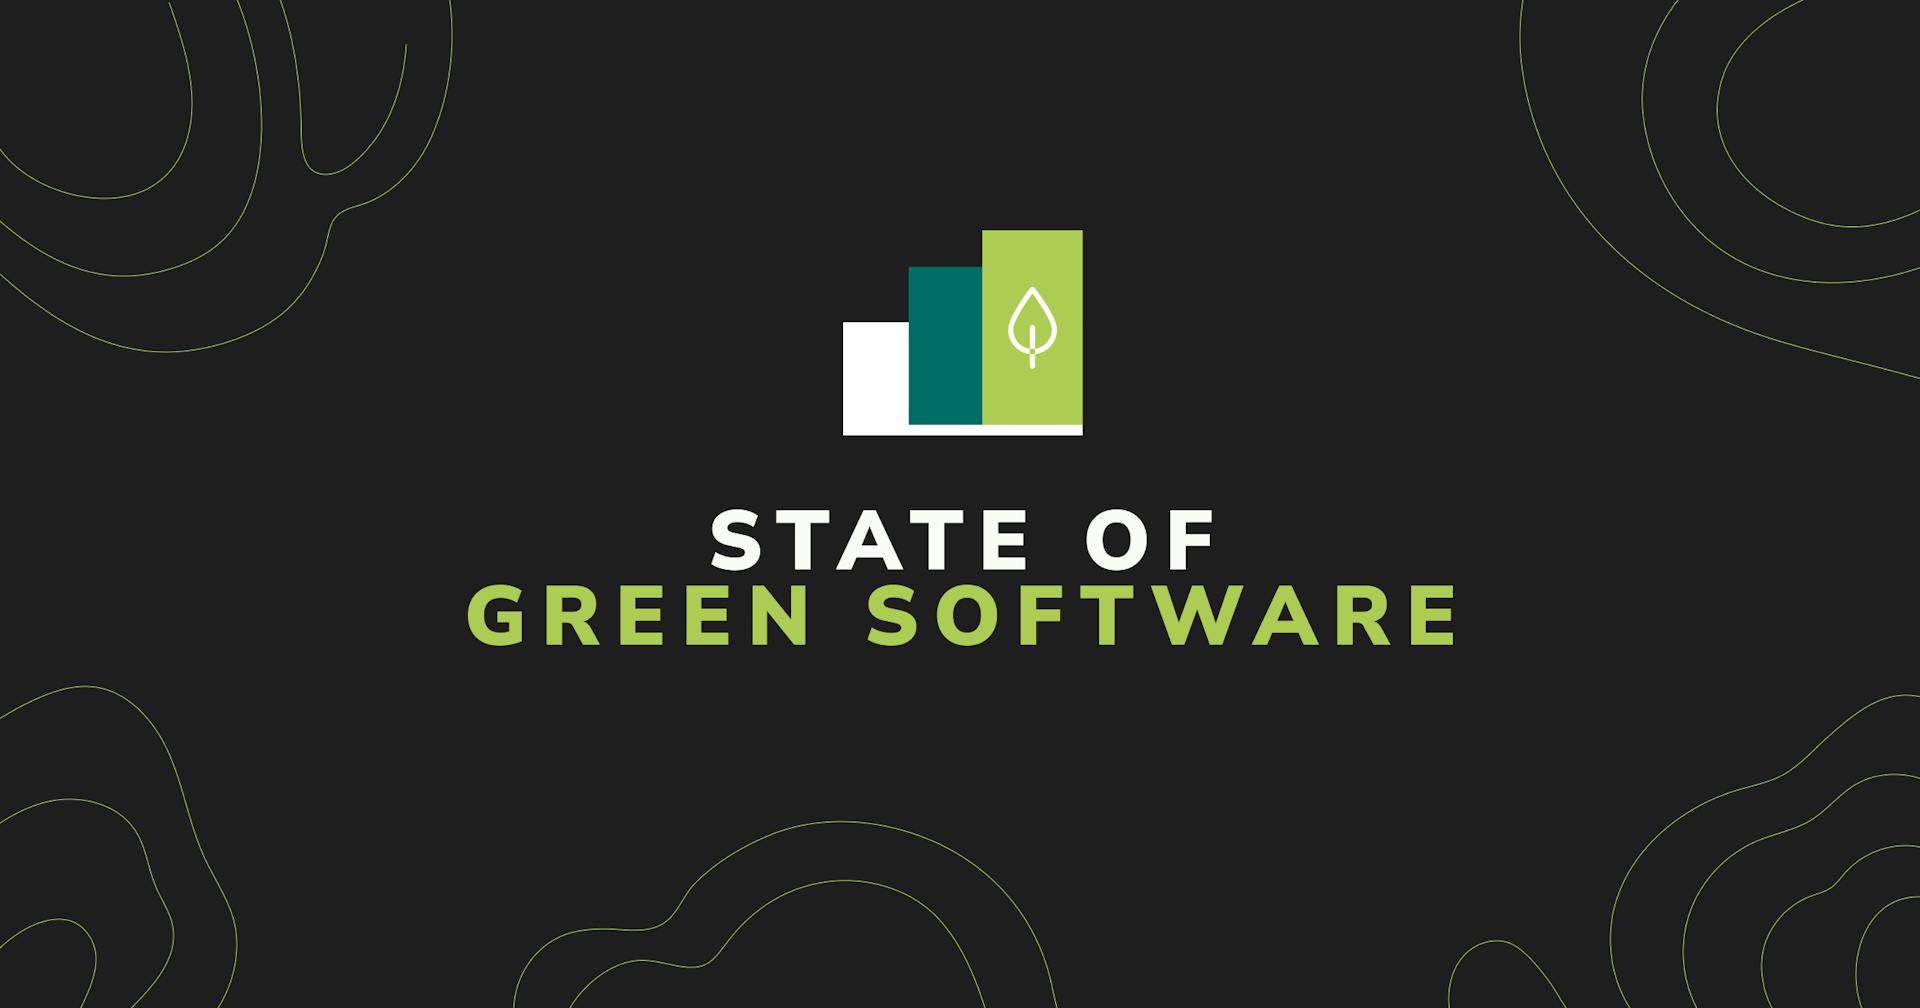 Green Software Foundation Releases First-Ever State of Green Software Report